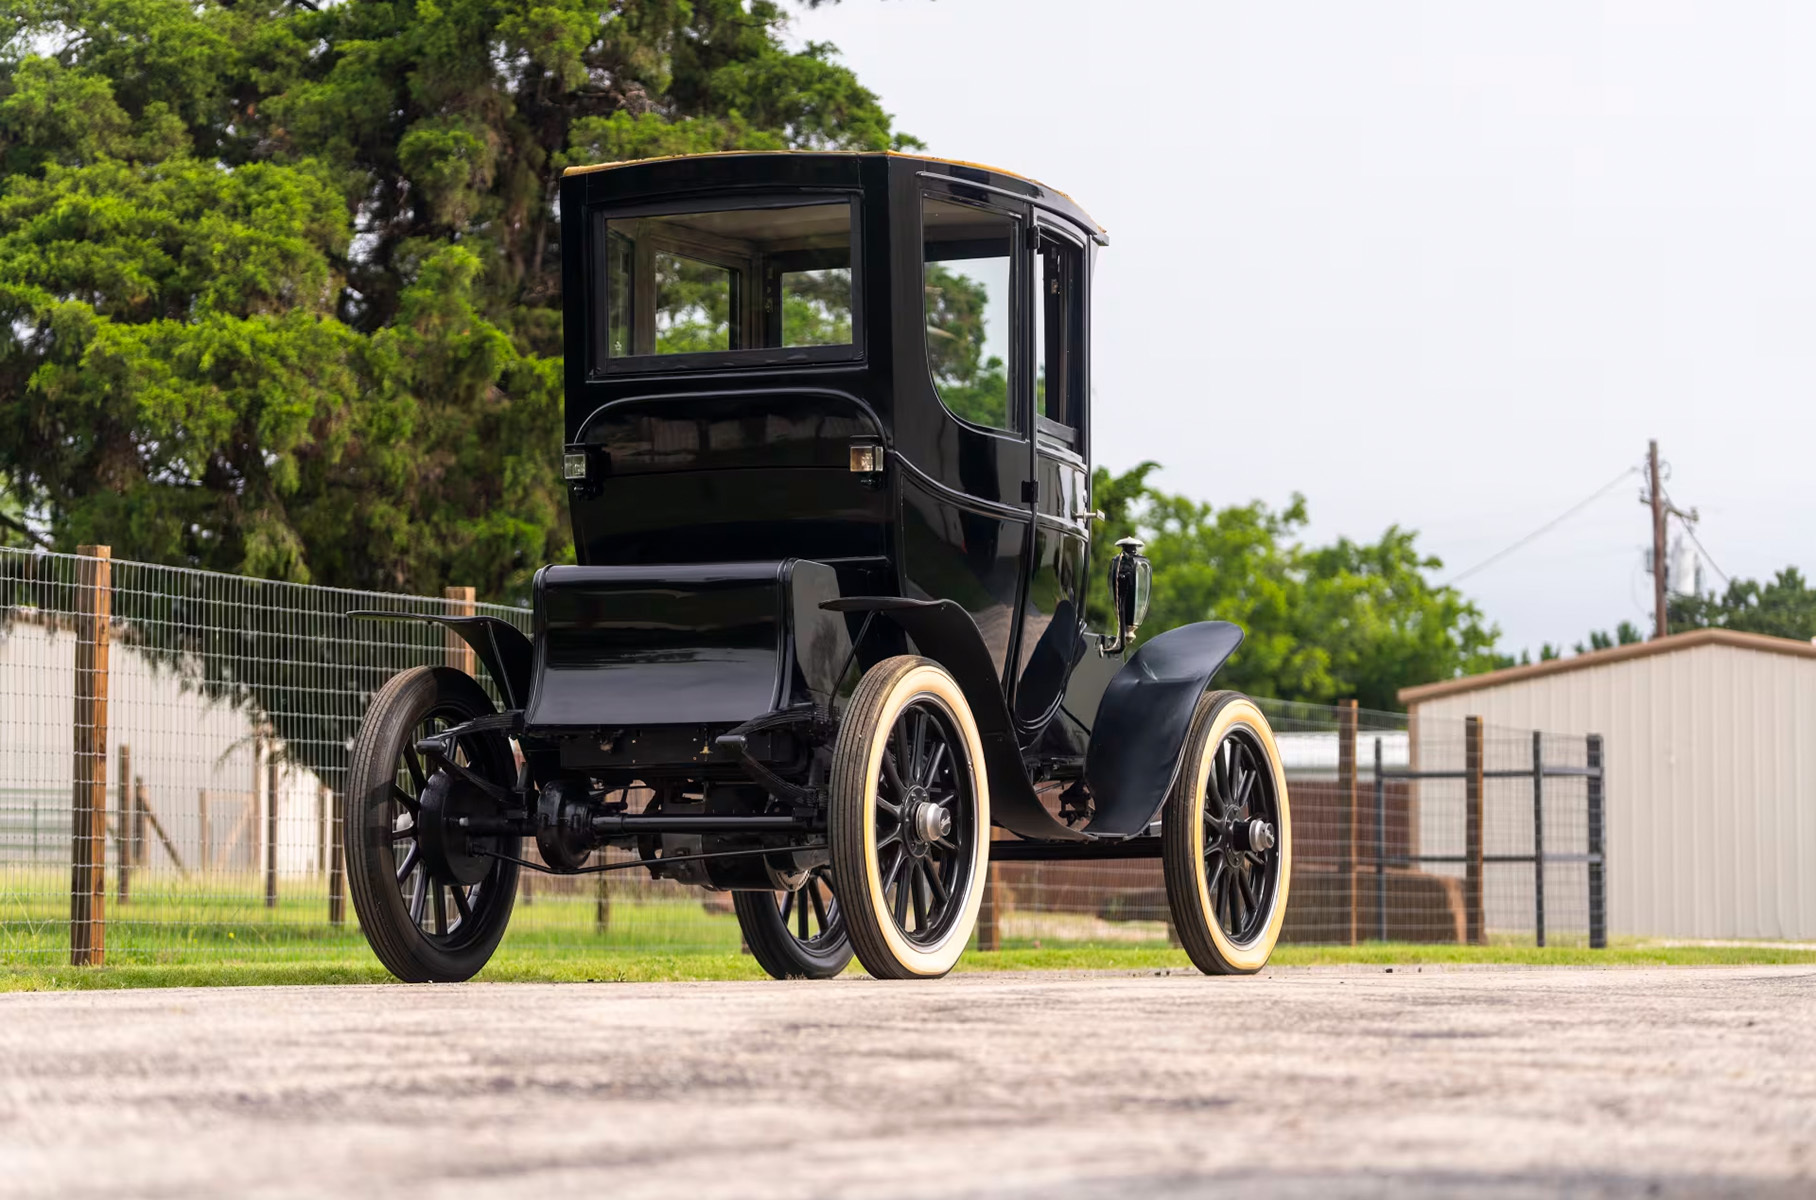 Waverly Model 93 electric car from 1913 will be put up for auction